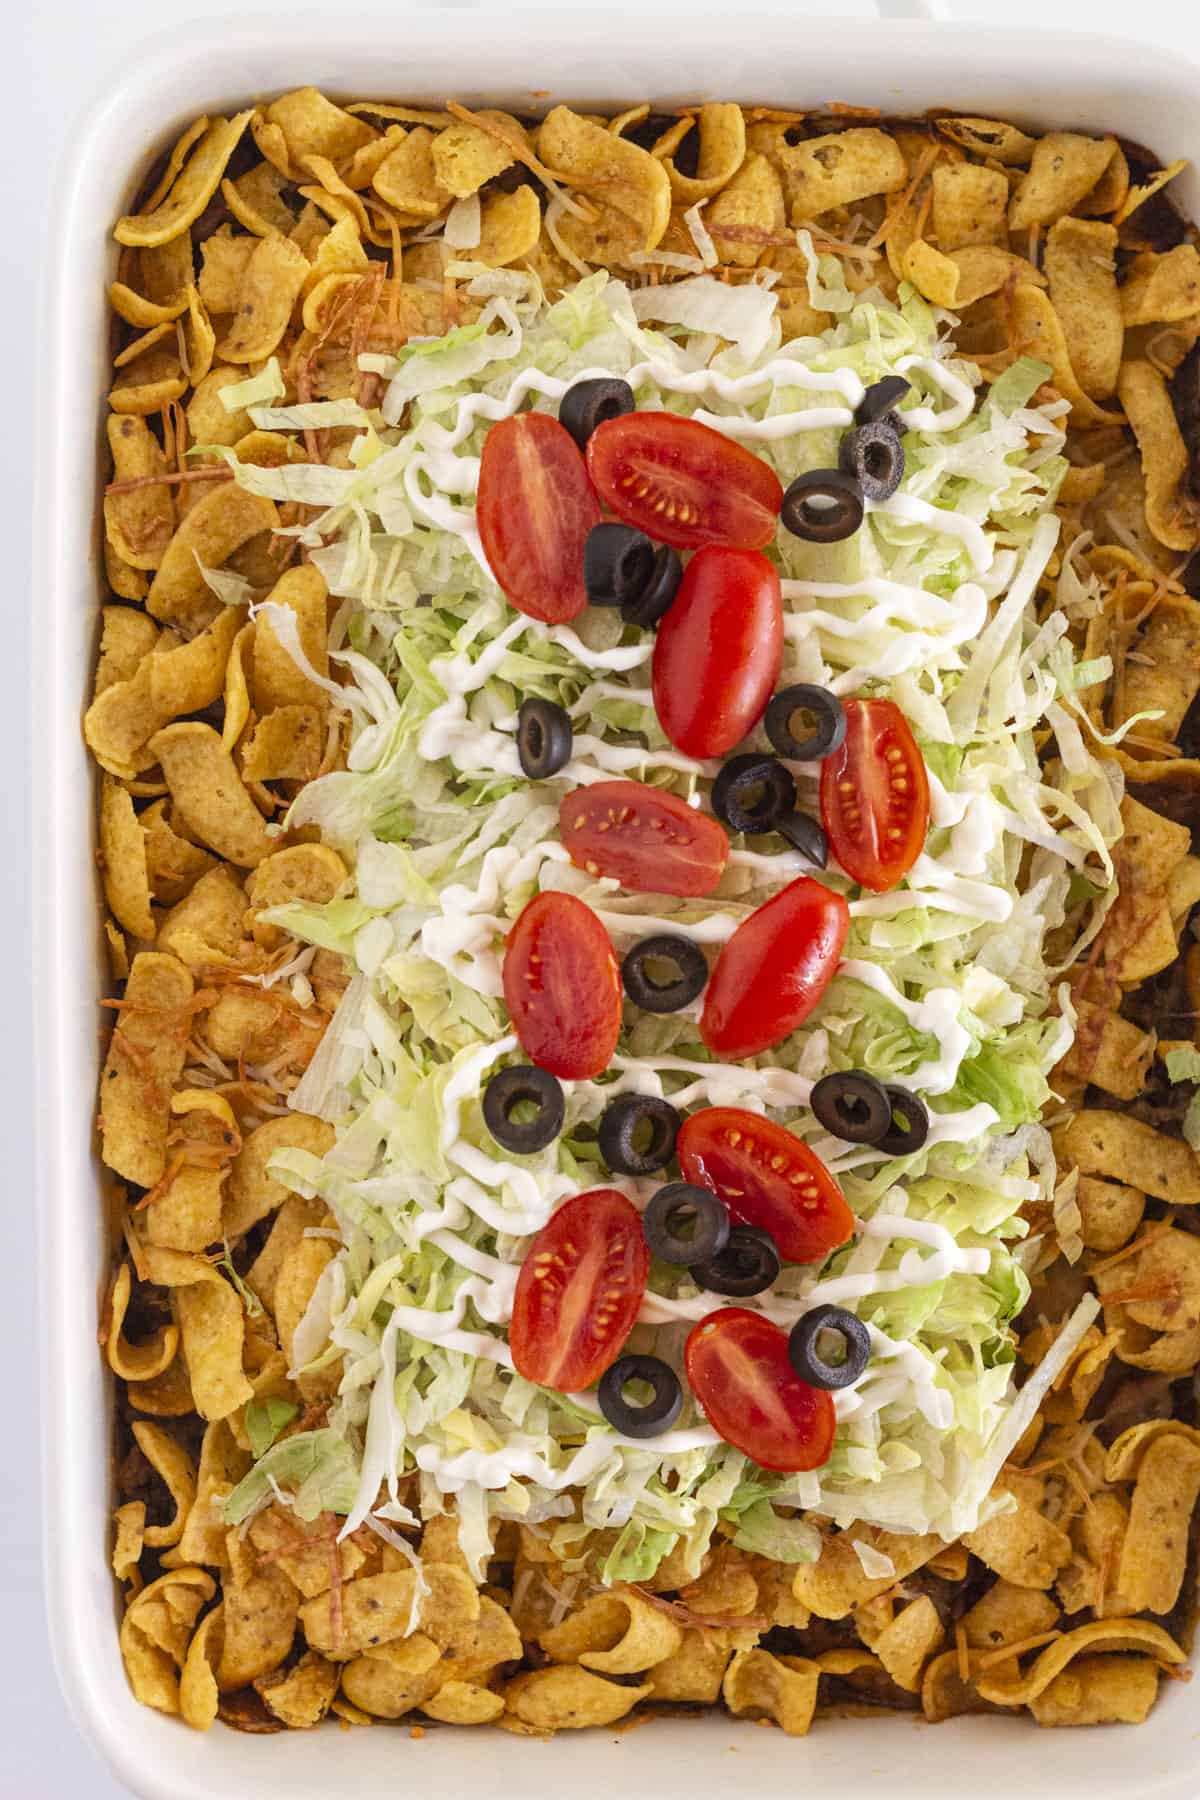 Looking down on a whole baked walking taco casserole.